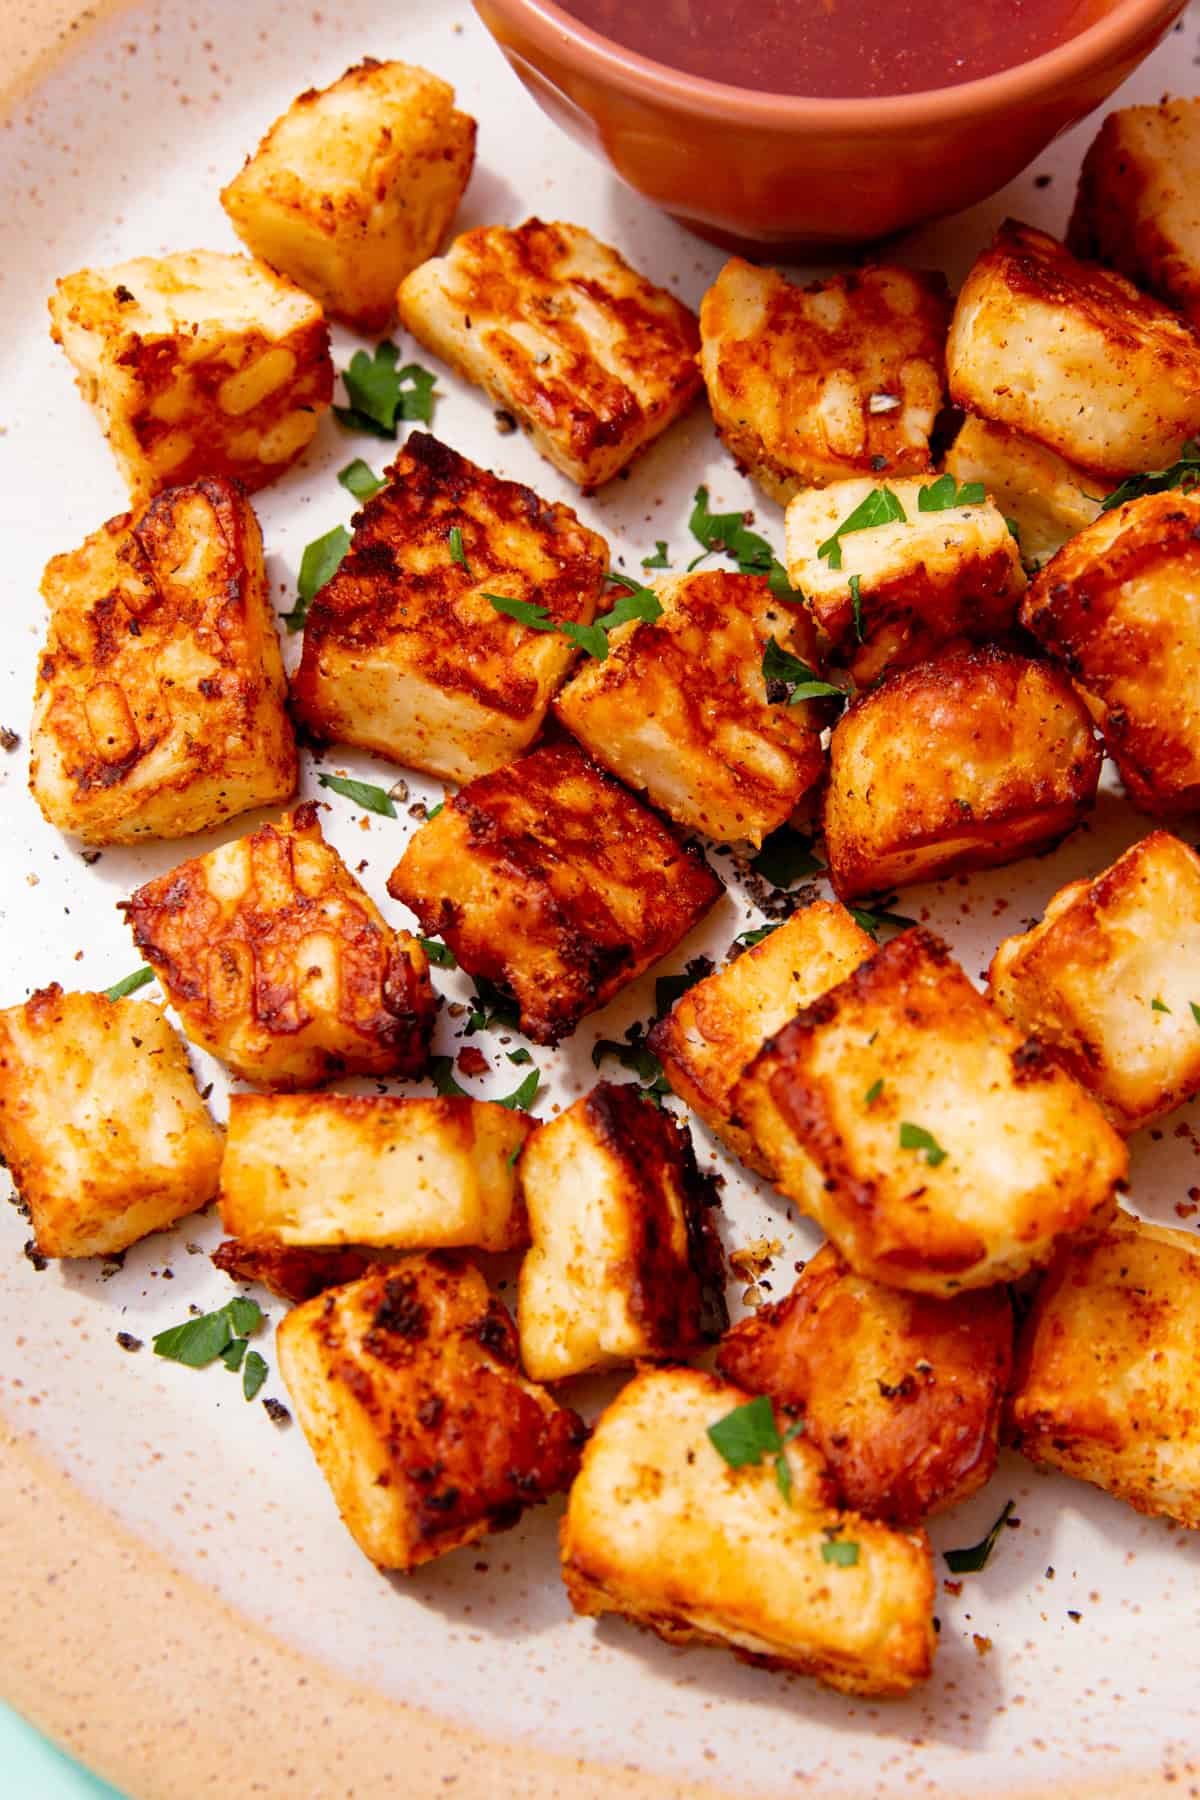 Golden browned halloumi cubes on a plate with some green herbs and a small bowl of chilli sauce.